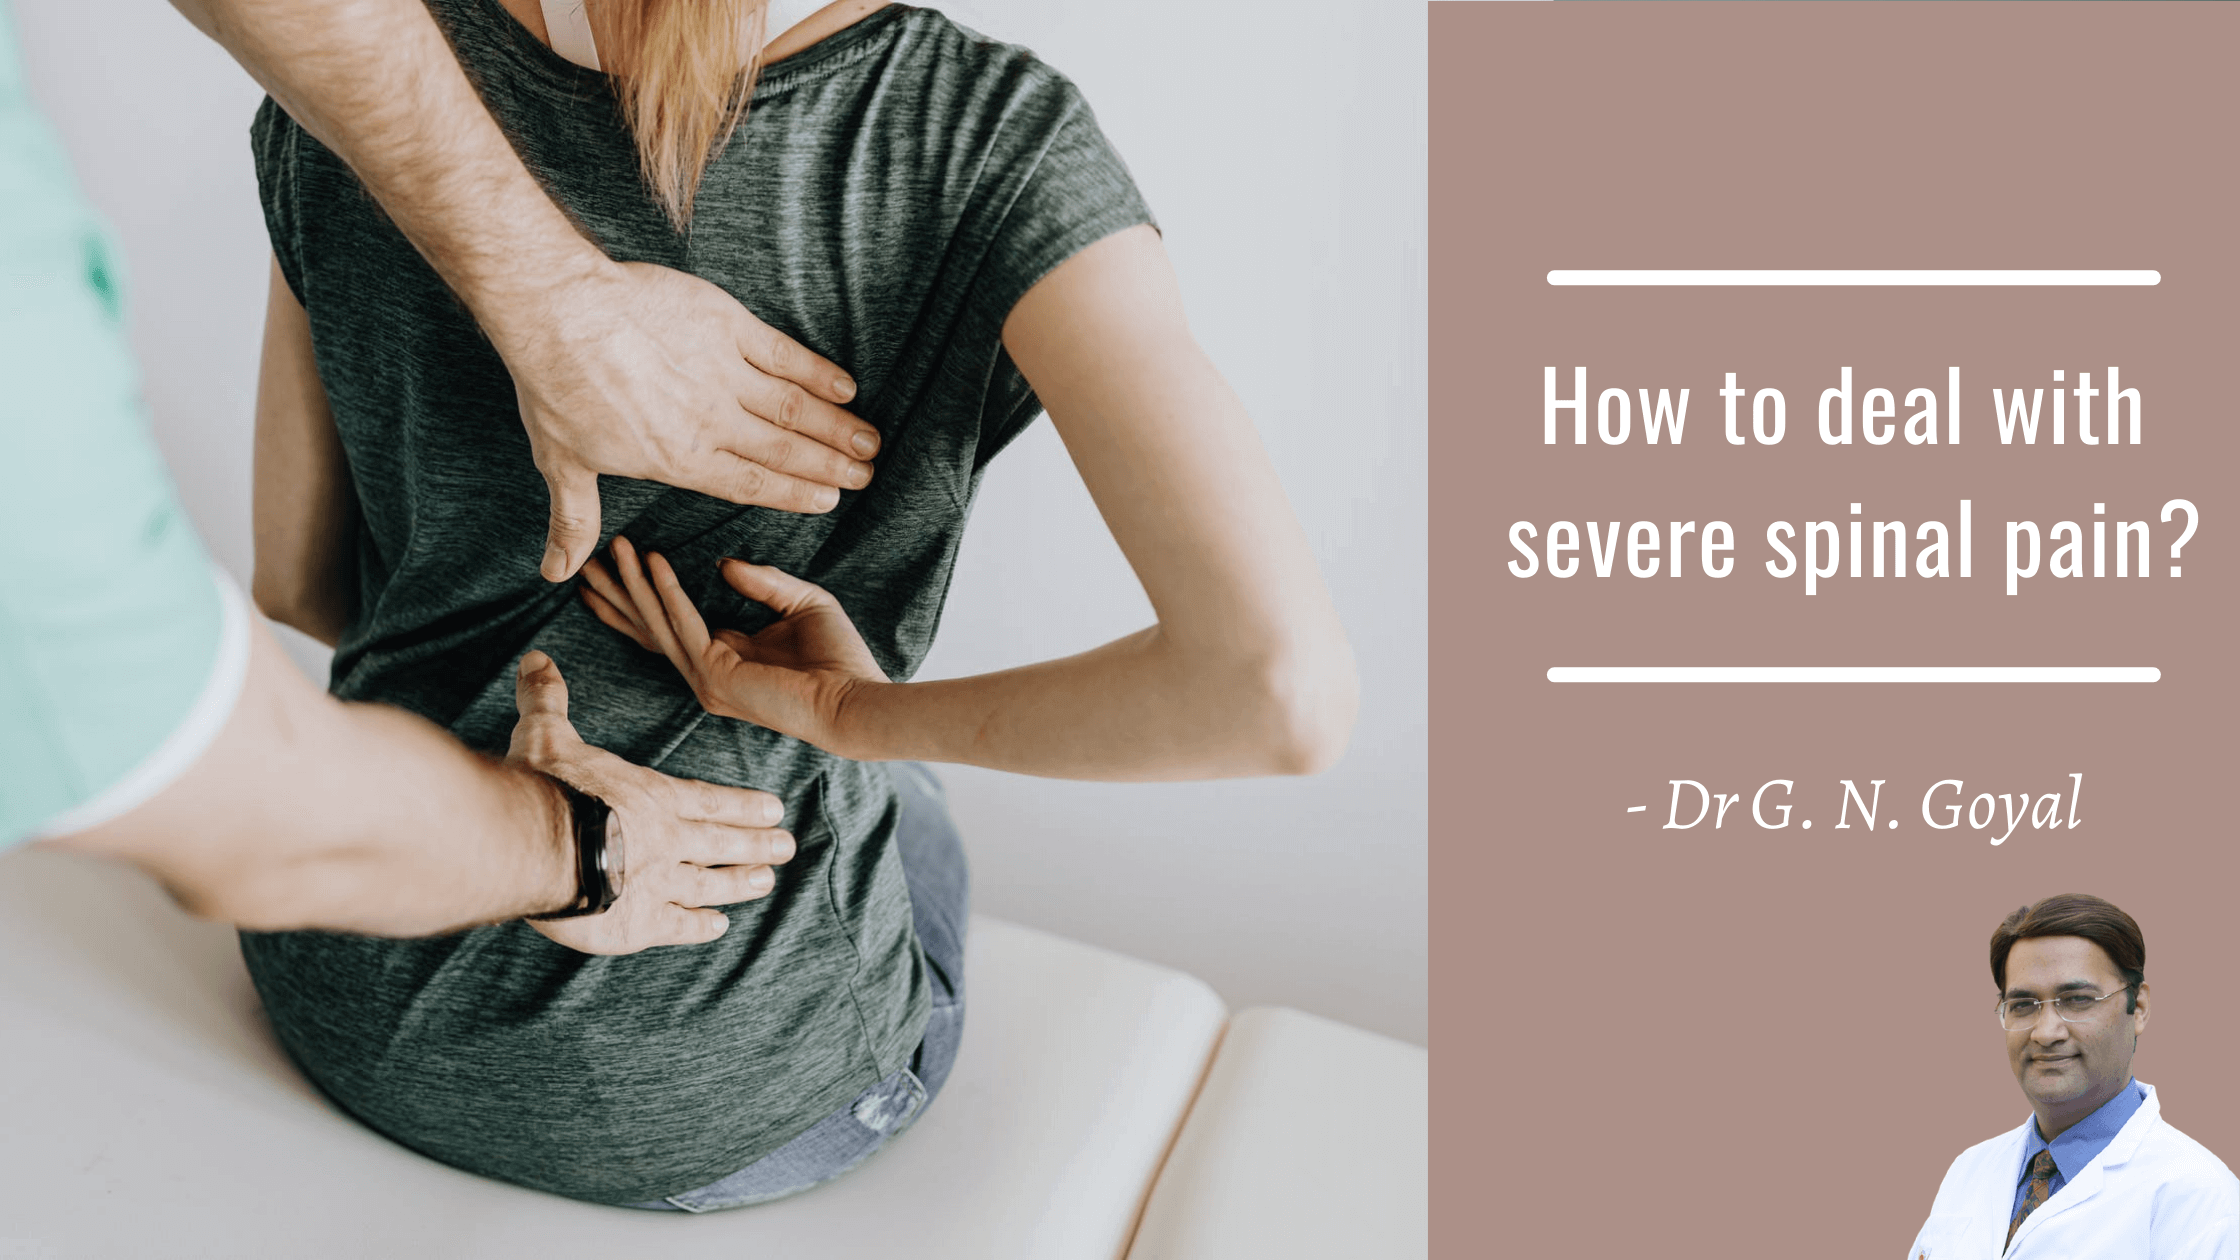 How to deal with severe spinal pain?